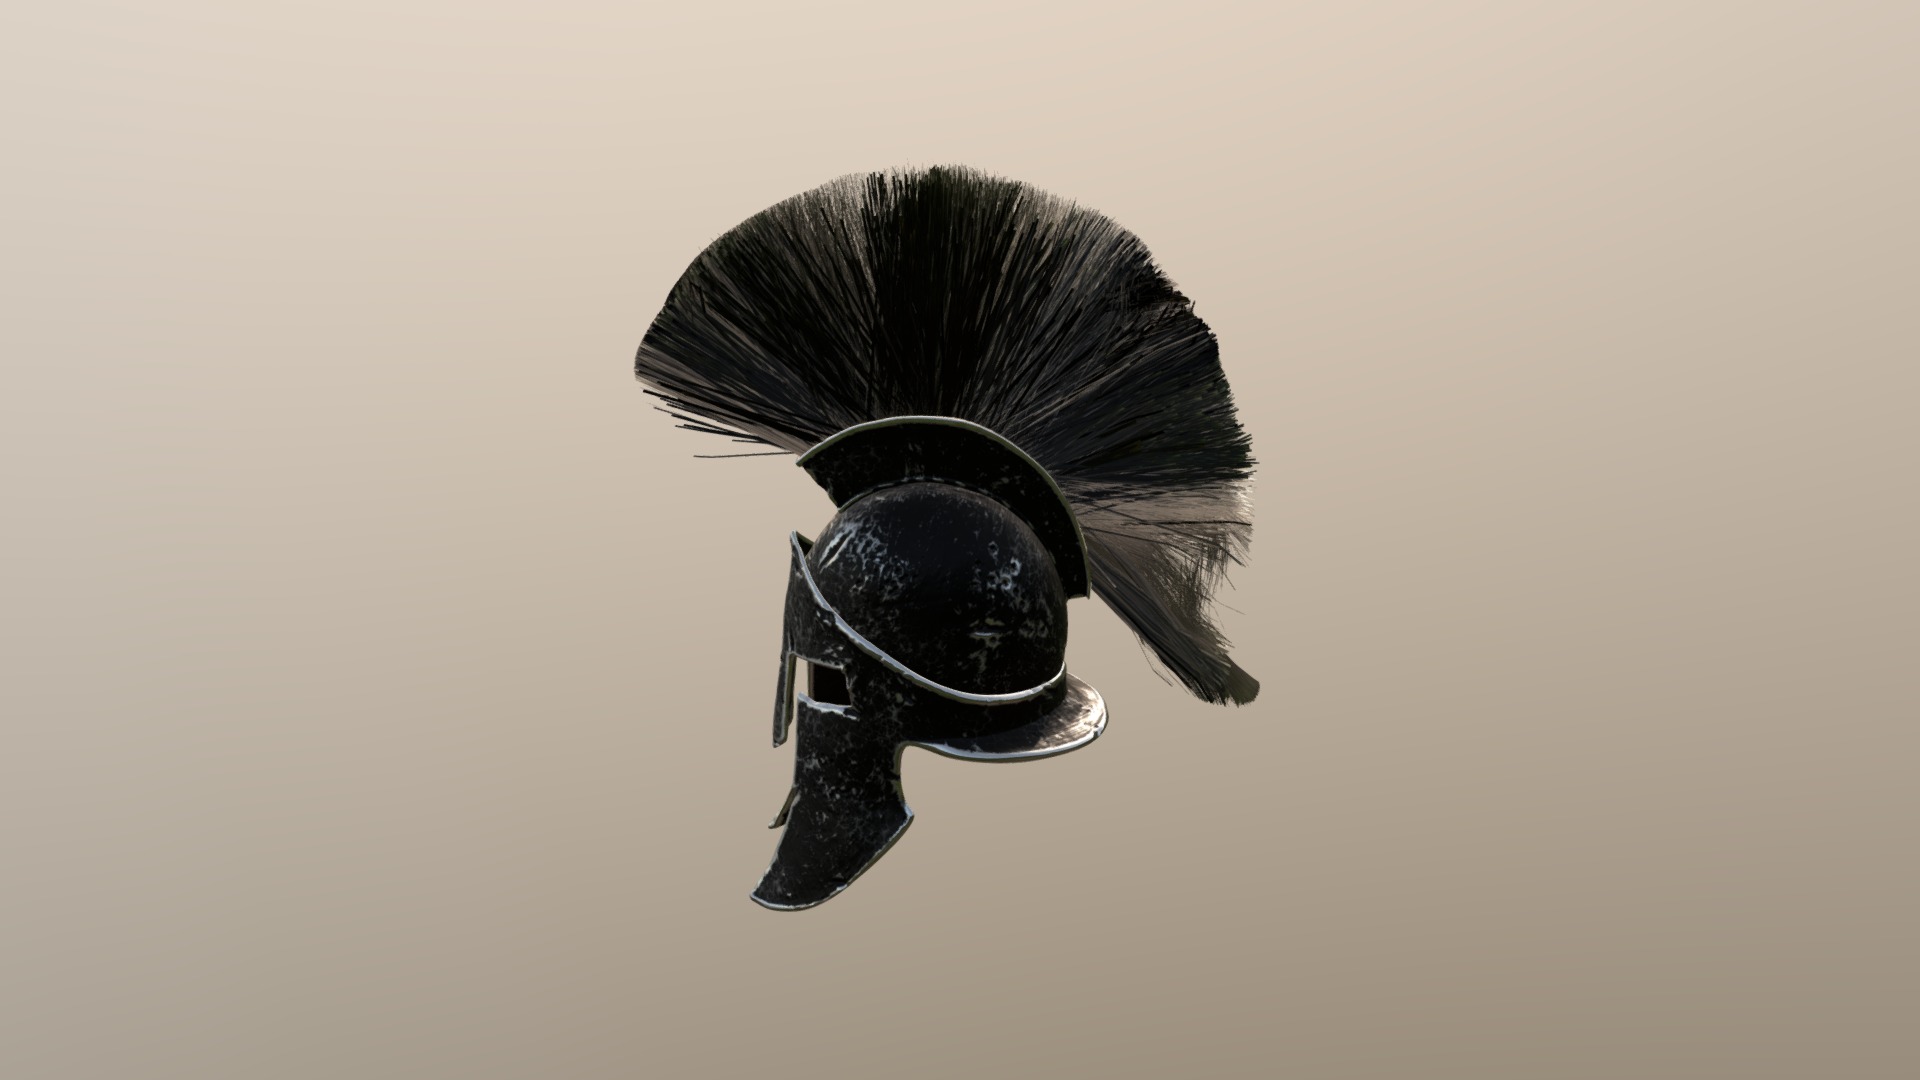 3D model HELMET - This is a 3D model of the HELMET. The 3D model is about a black feather on a white background.